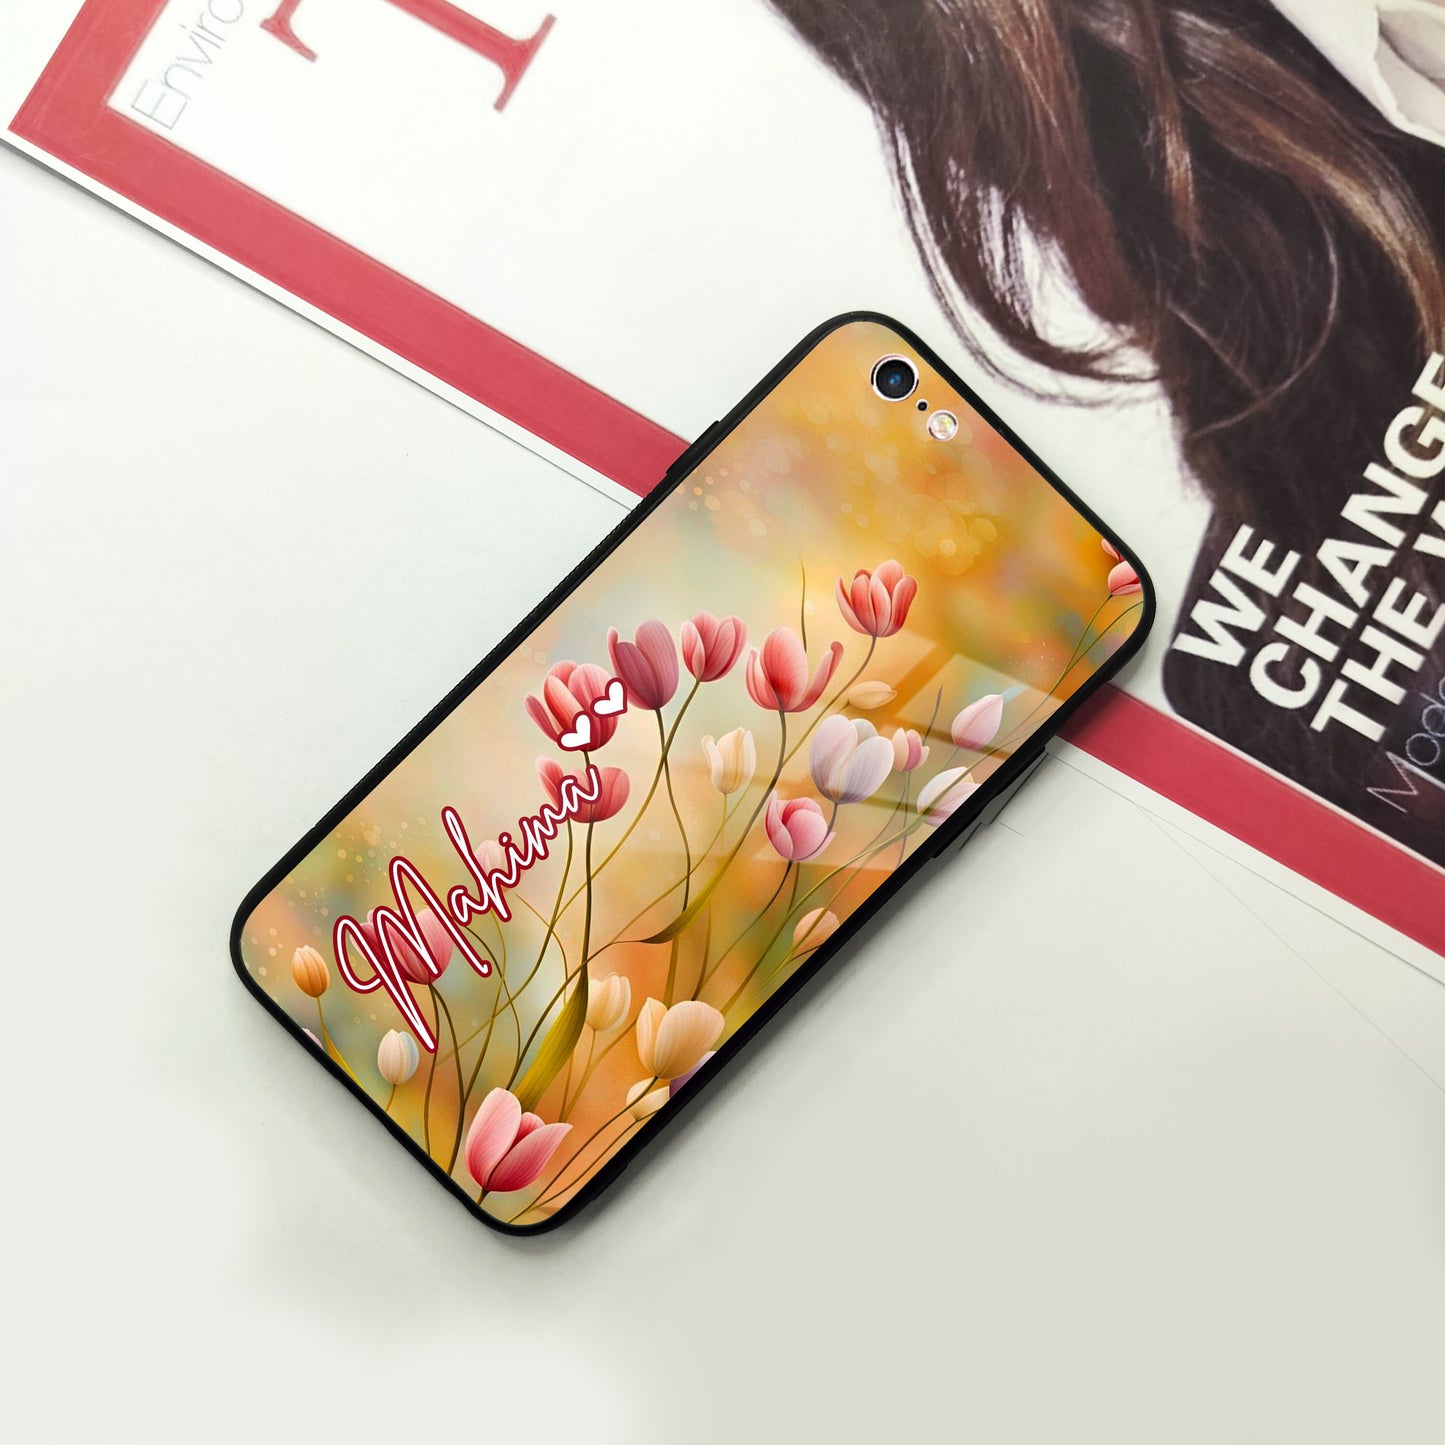 Tulip Floral Glass Case Cover For iPhone